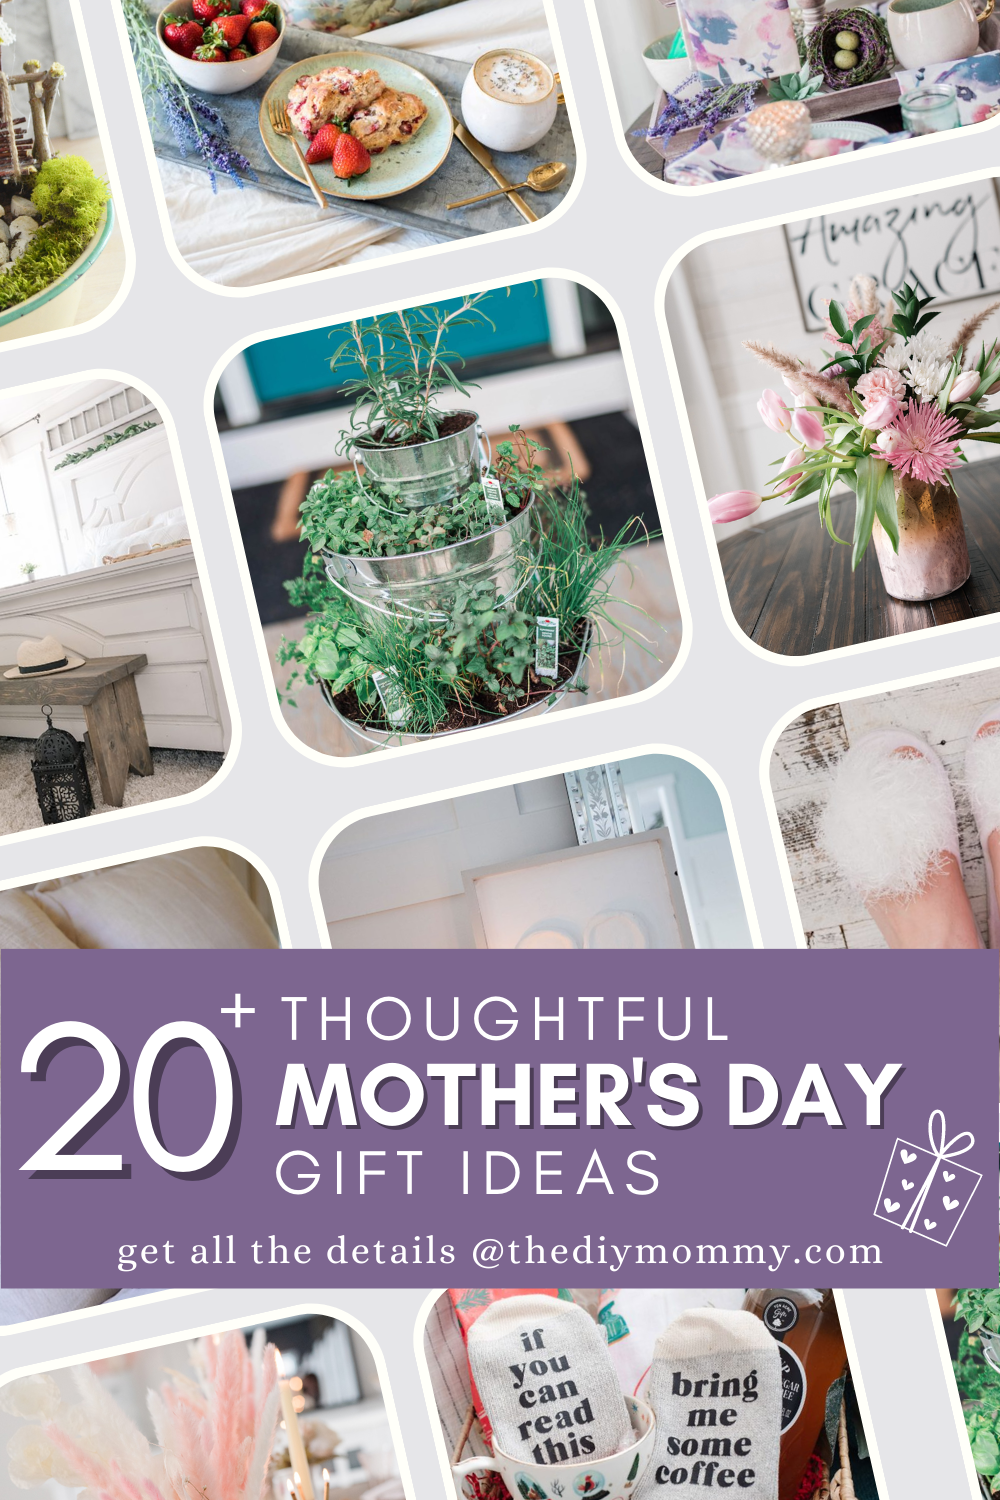 22 Thoughtful Mother’s Day Gift Ideas